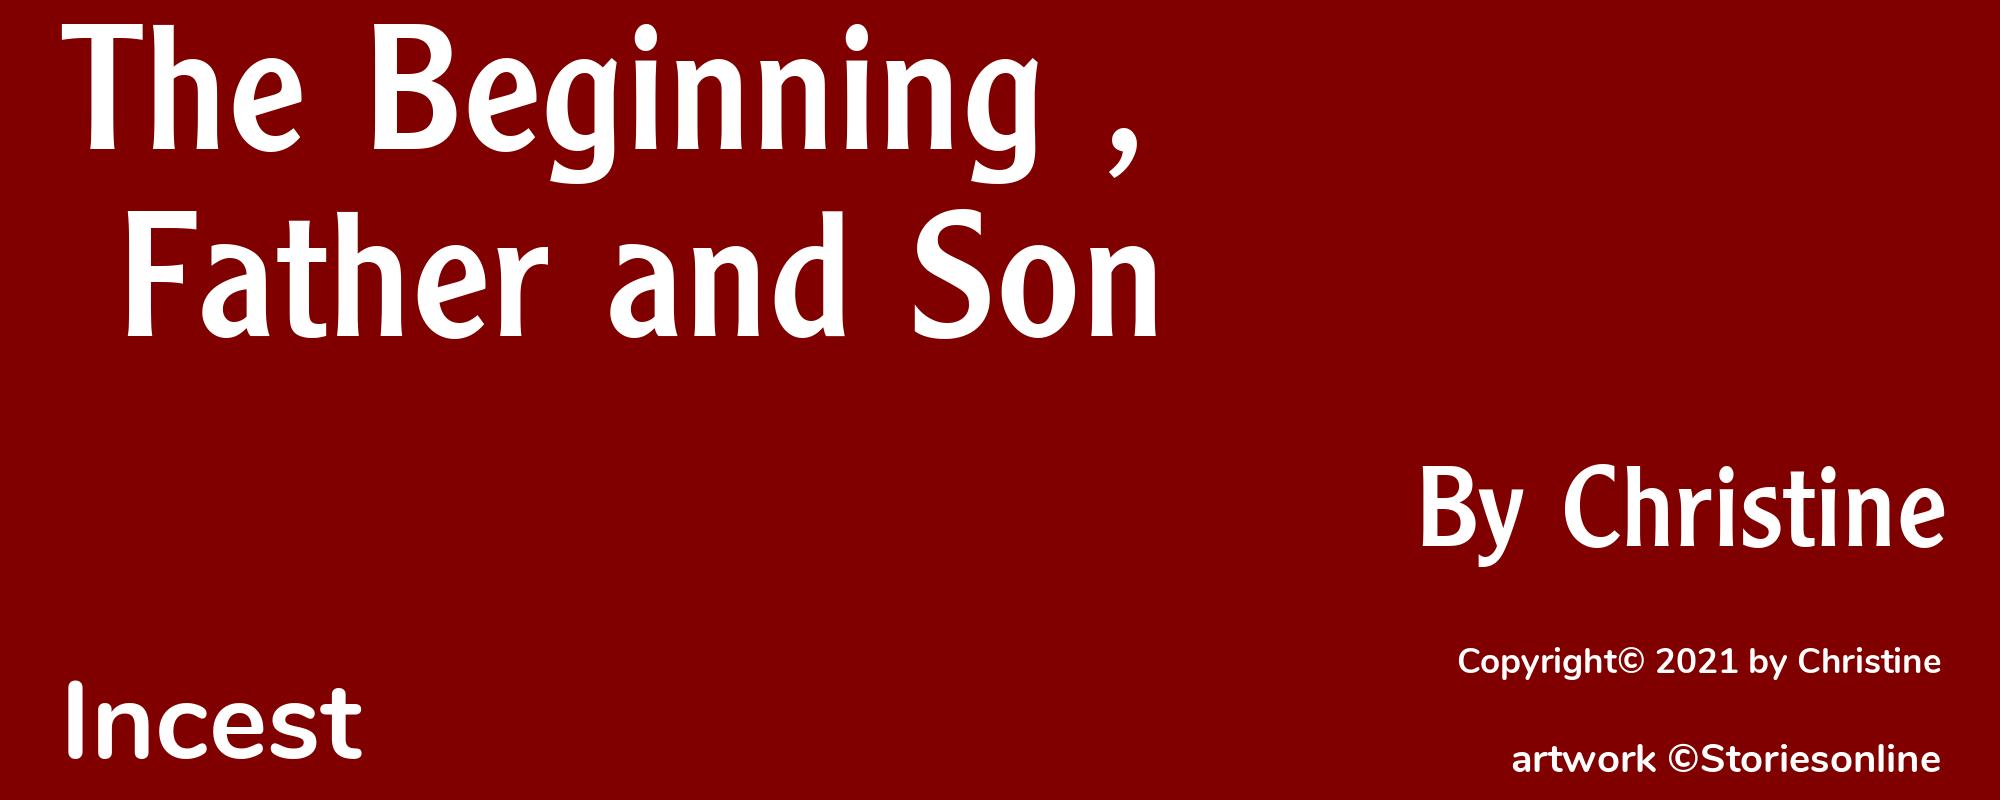 The Beginning , Father and Son - Cover